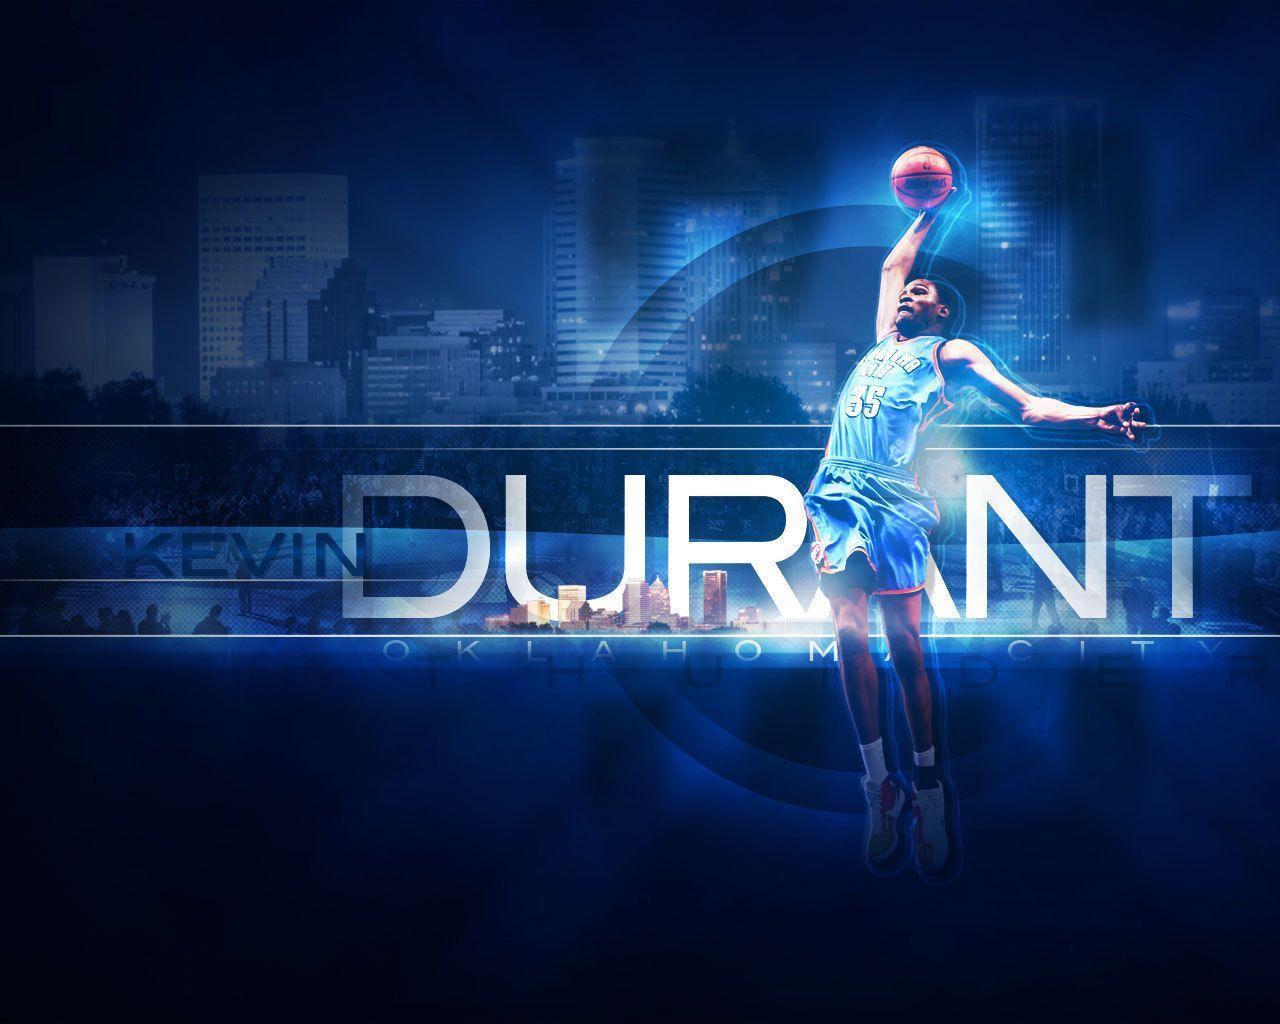 Kevin Durant image Nice Background HD wallpaper and background